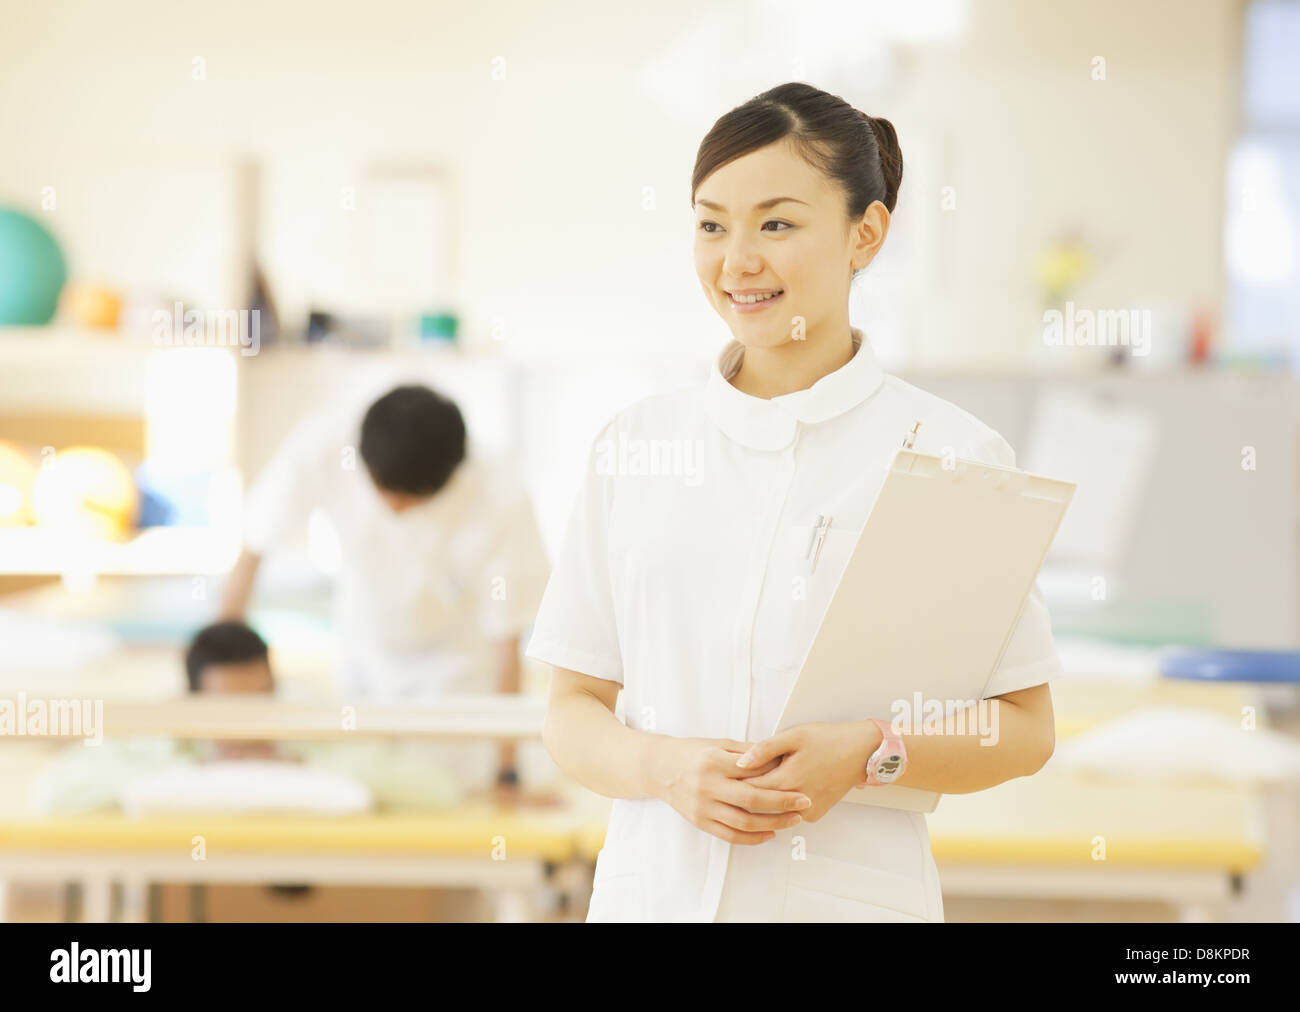 Physical therapist smiling Stock Photo